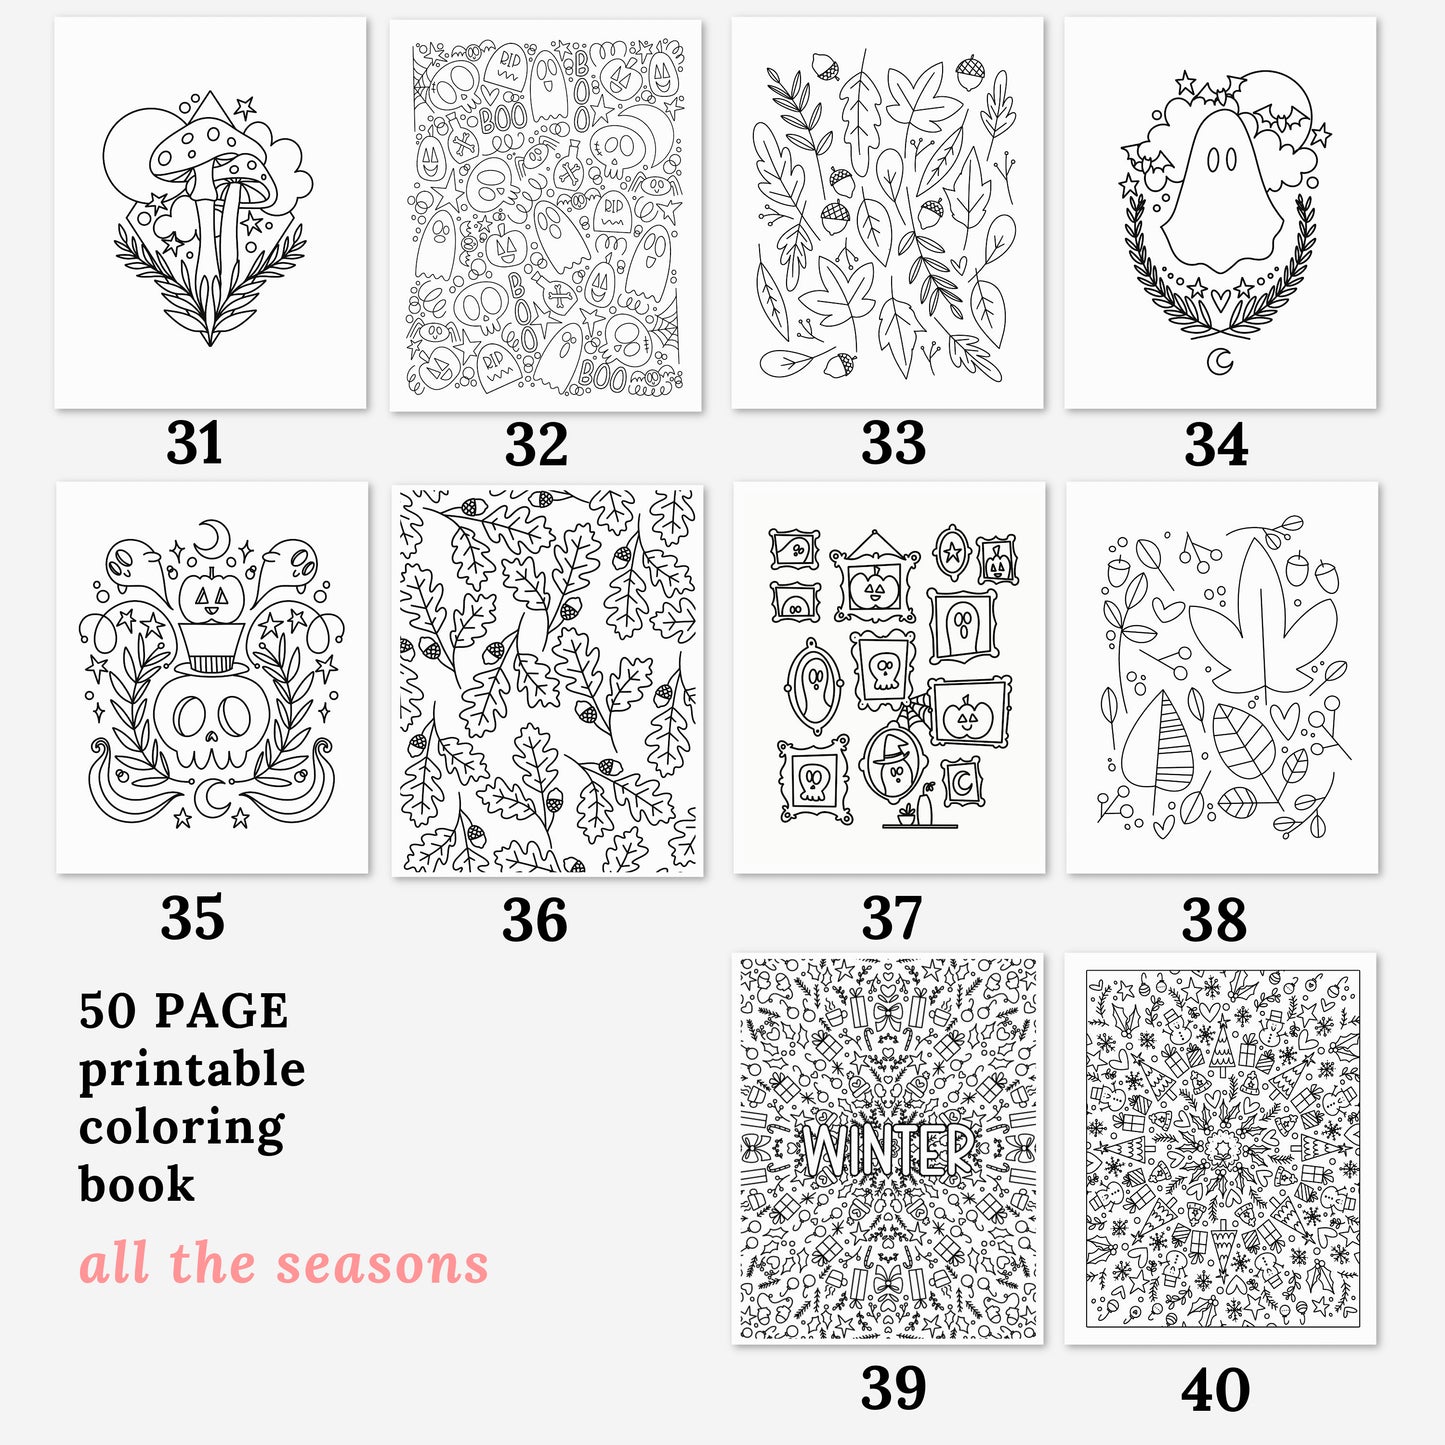 50 Coloring Pages | All The Seasons Digital Coloring Book Illustrations | Mindful Printable Coloring Sheets | Calming Seasonal Doodles